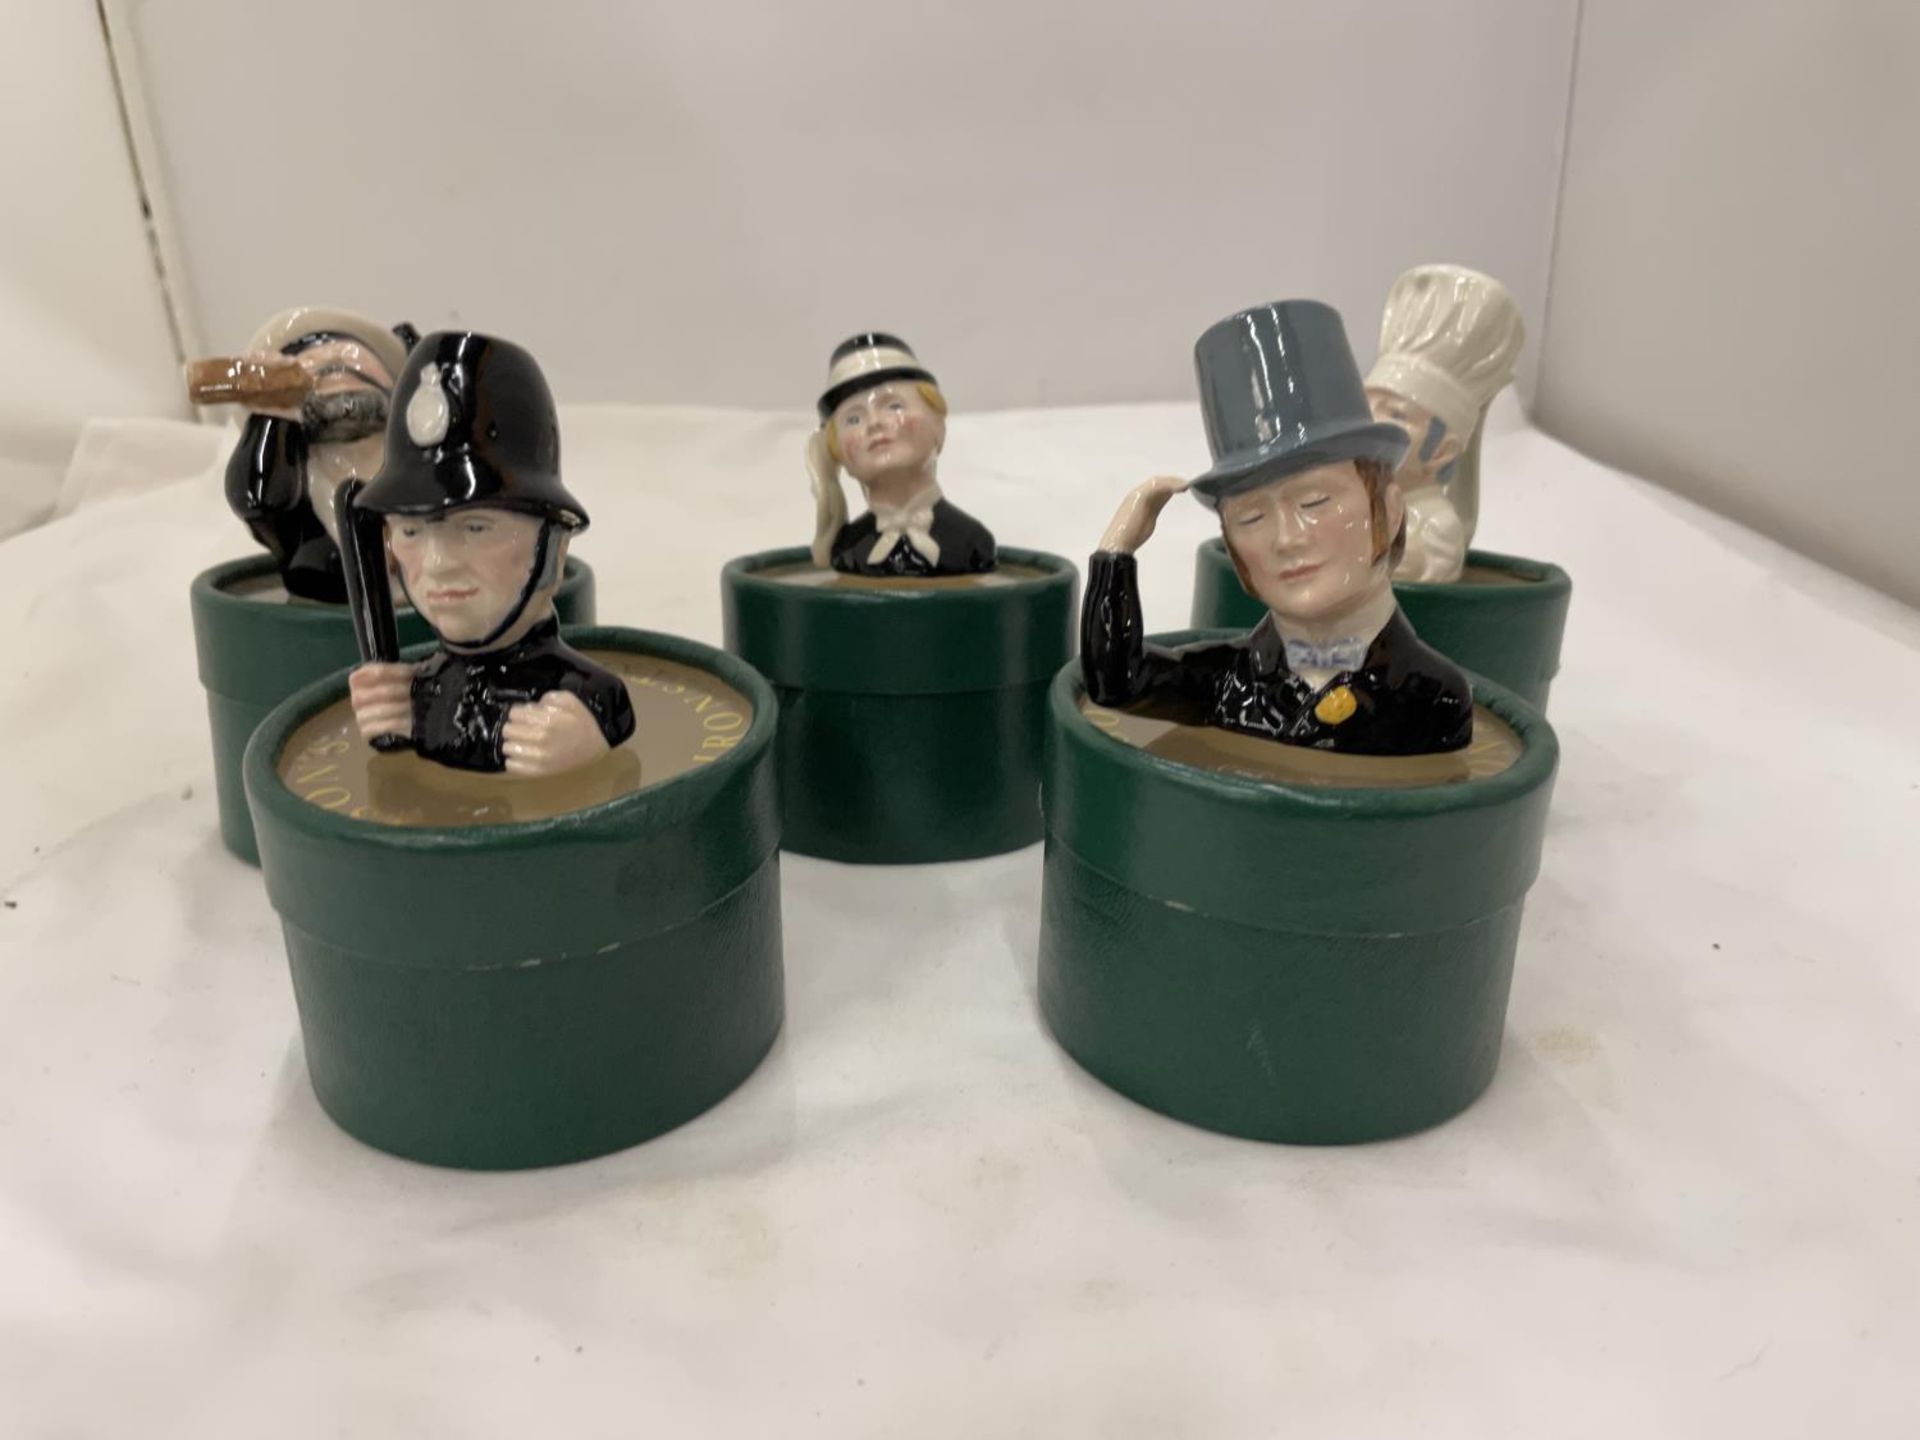 FIVE MASONS MINIATURE JUGS IN BOXES TO INCLUDE POLICEMAN, CHEF, ETC - Image 3 of 3